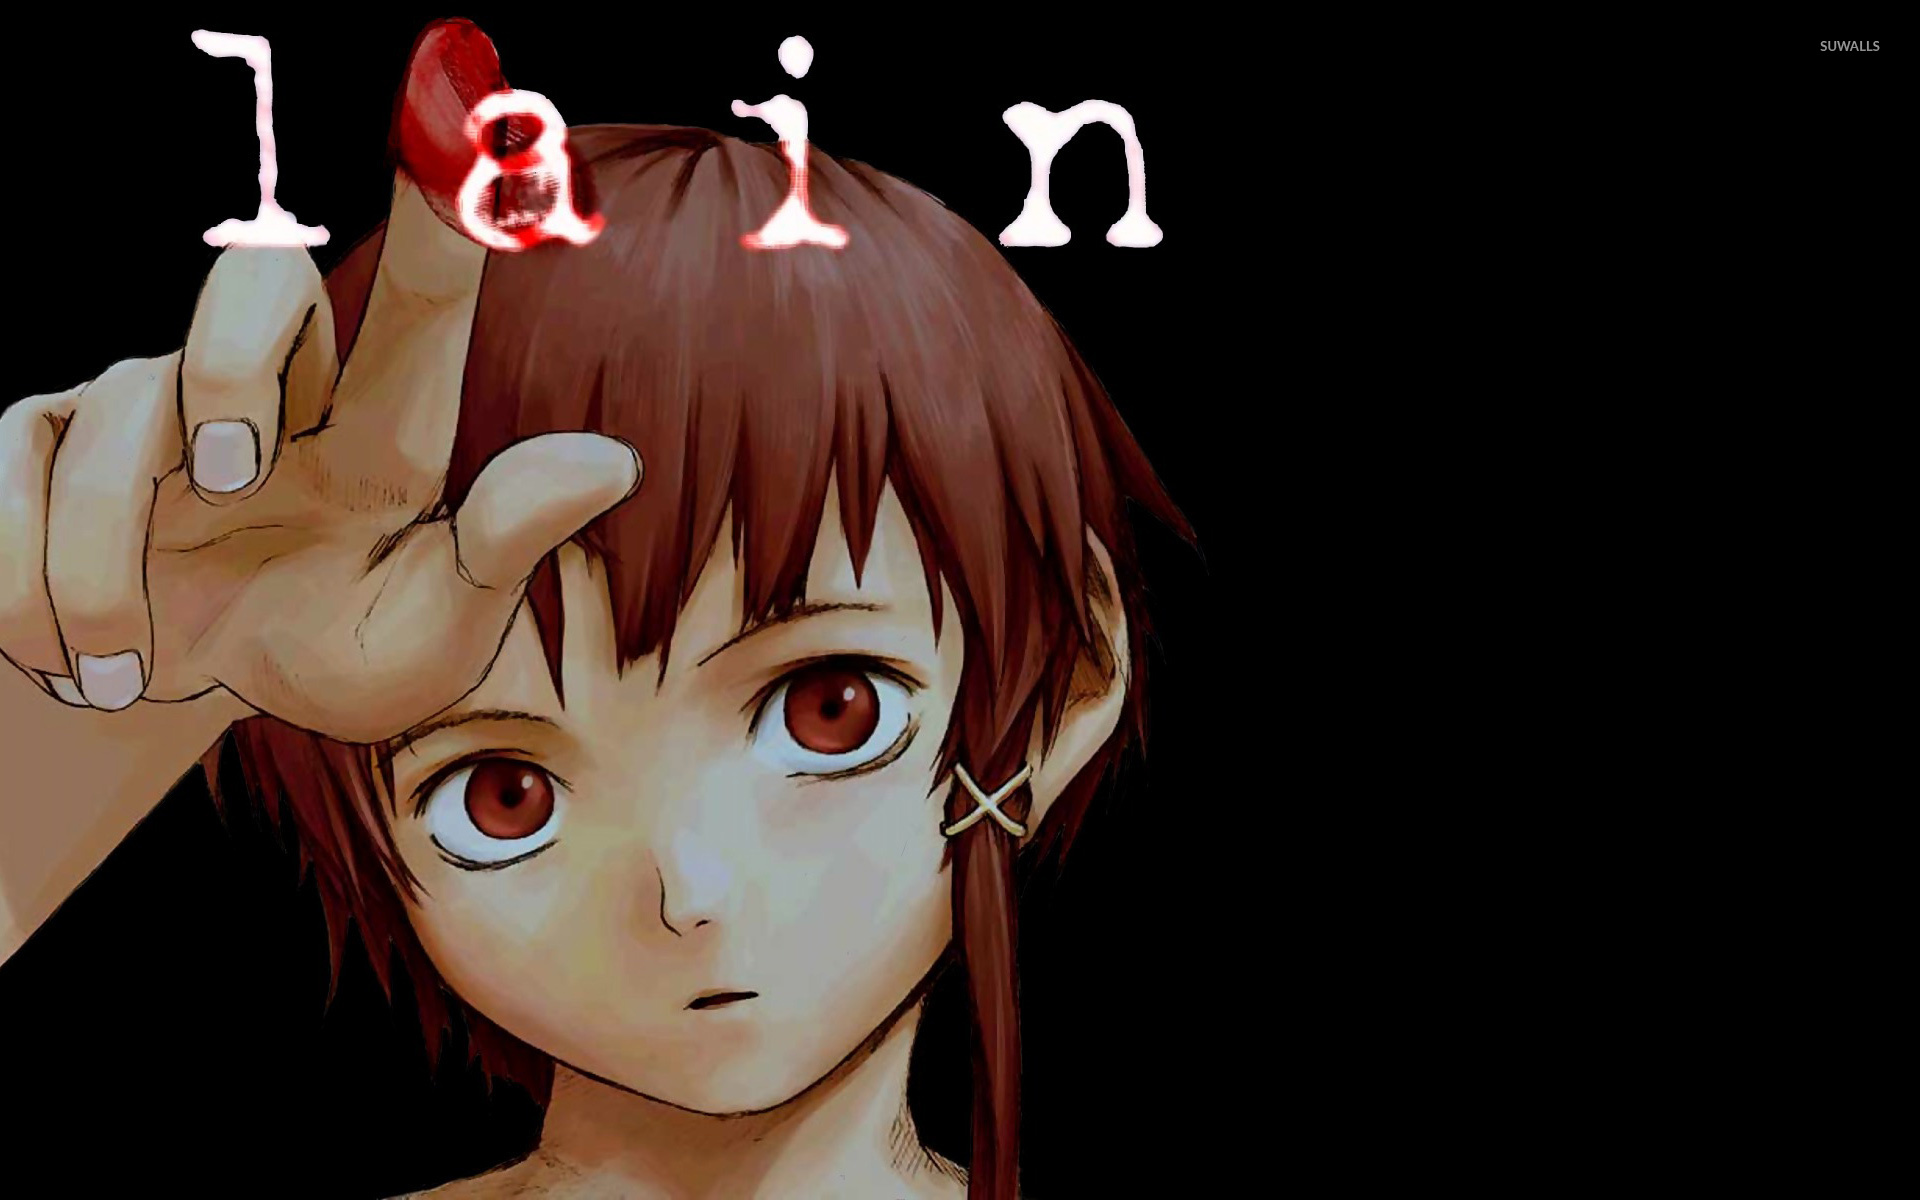 108 Serial Experiments Lain Wallpapers 1920x1200 uncompressed 7z archive  in the comments  rAnimewallpaper